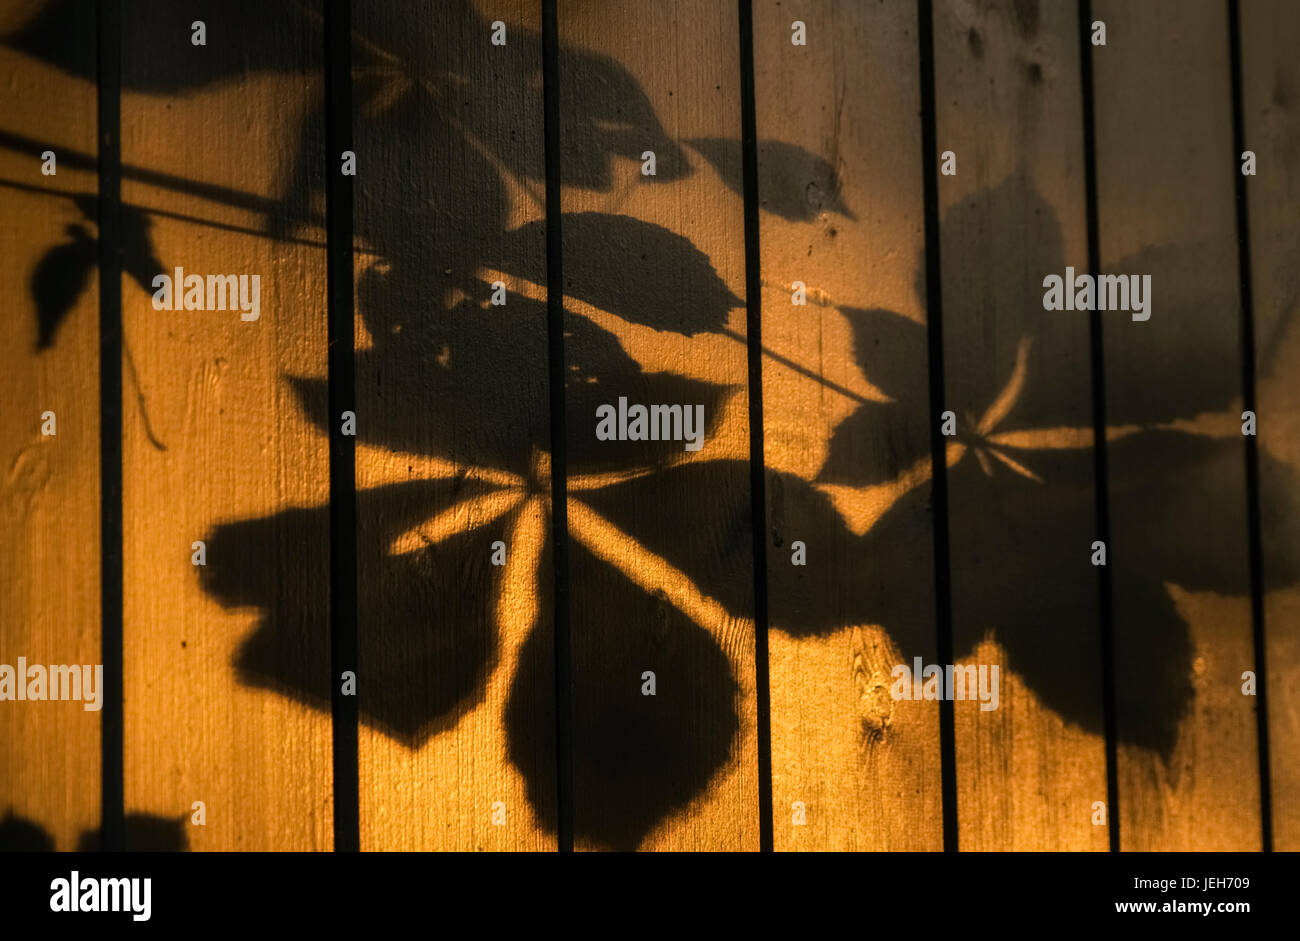 Shadows of tree branches and leaves cast on a wooden fence; Gateshead, Tyne and Wear, England Stock Photo